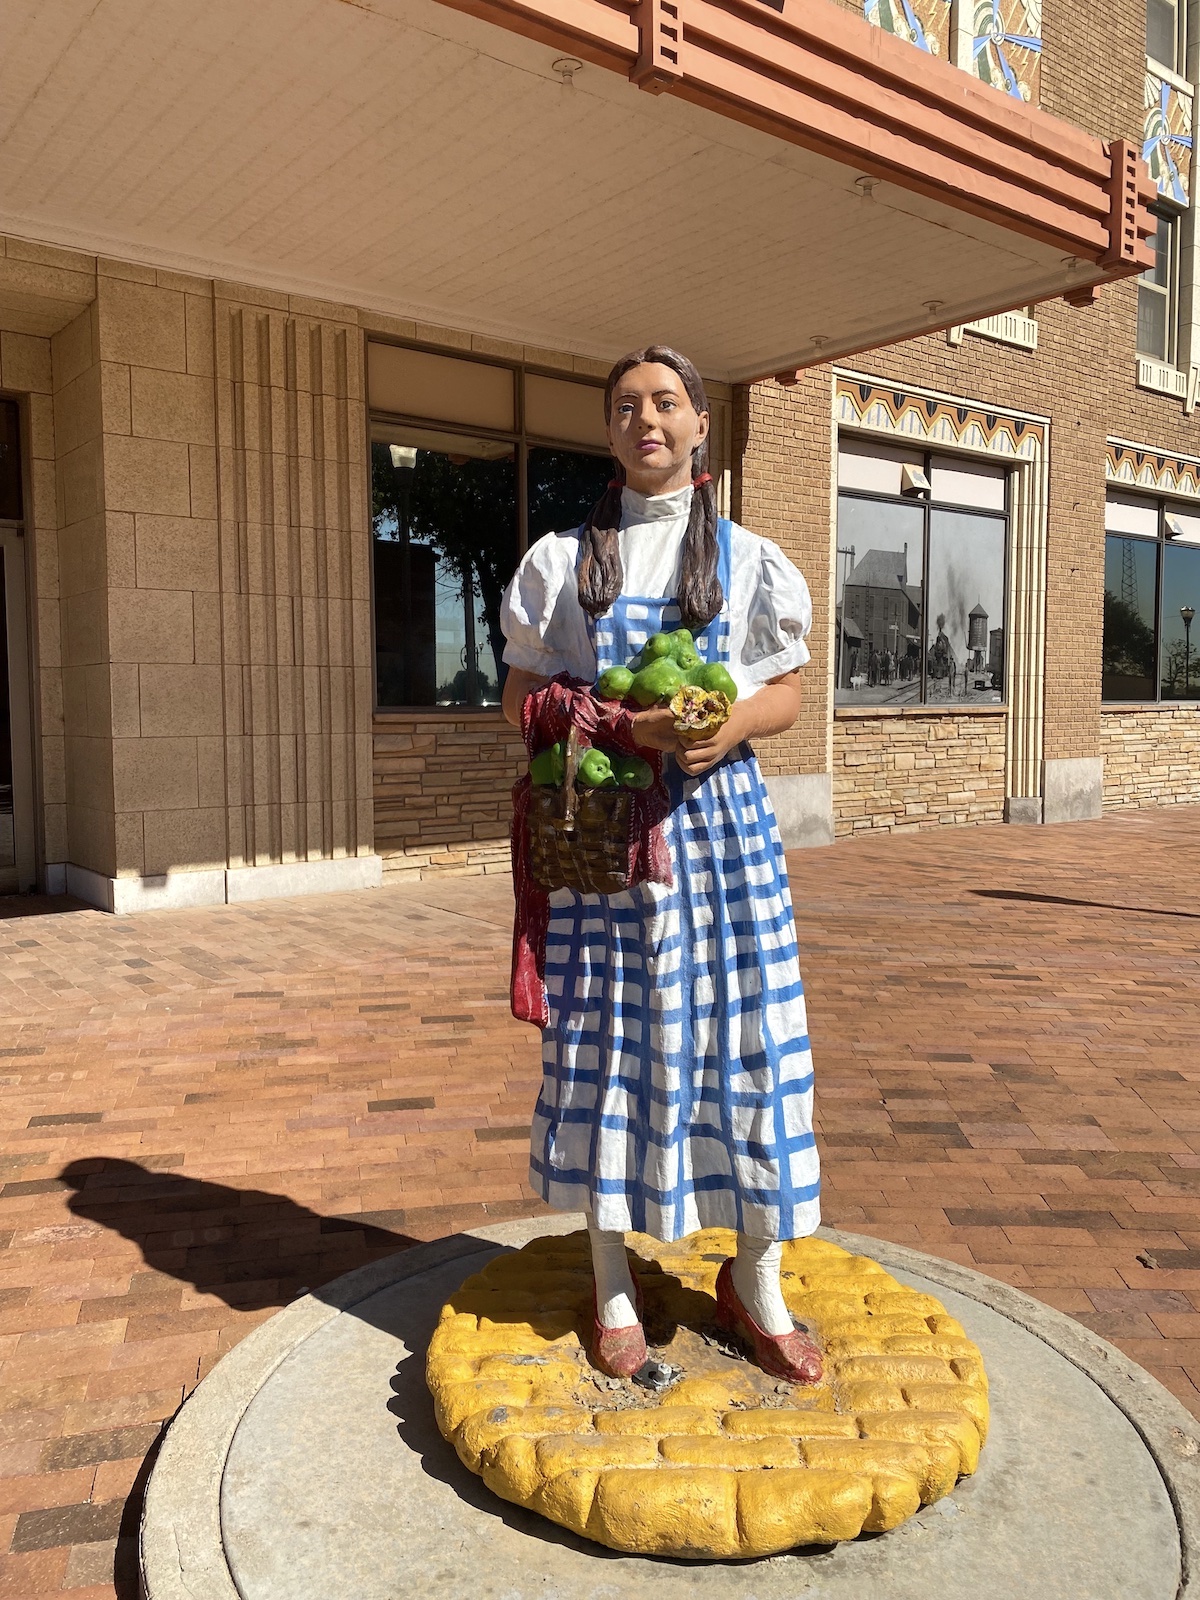 Painted statue of Dorothy Gale in downtown Liberal, Kansas